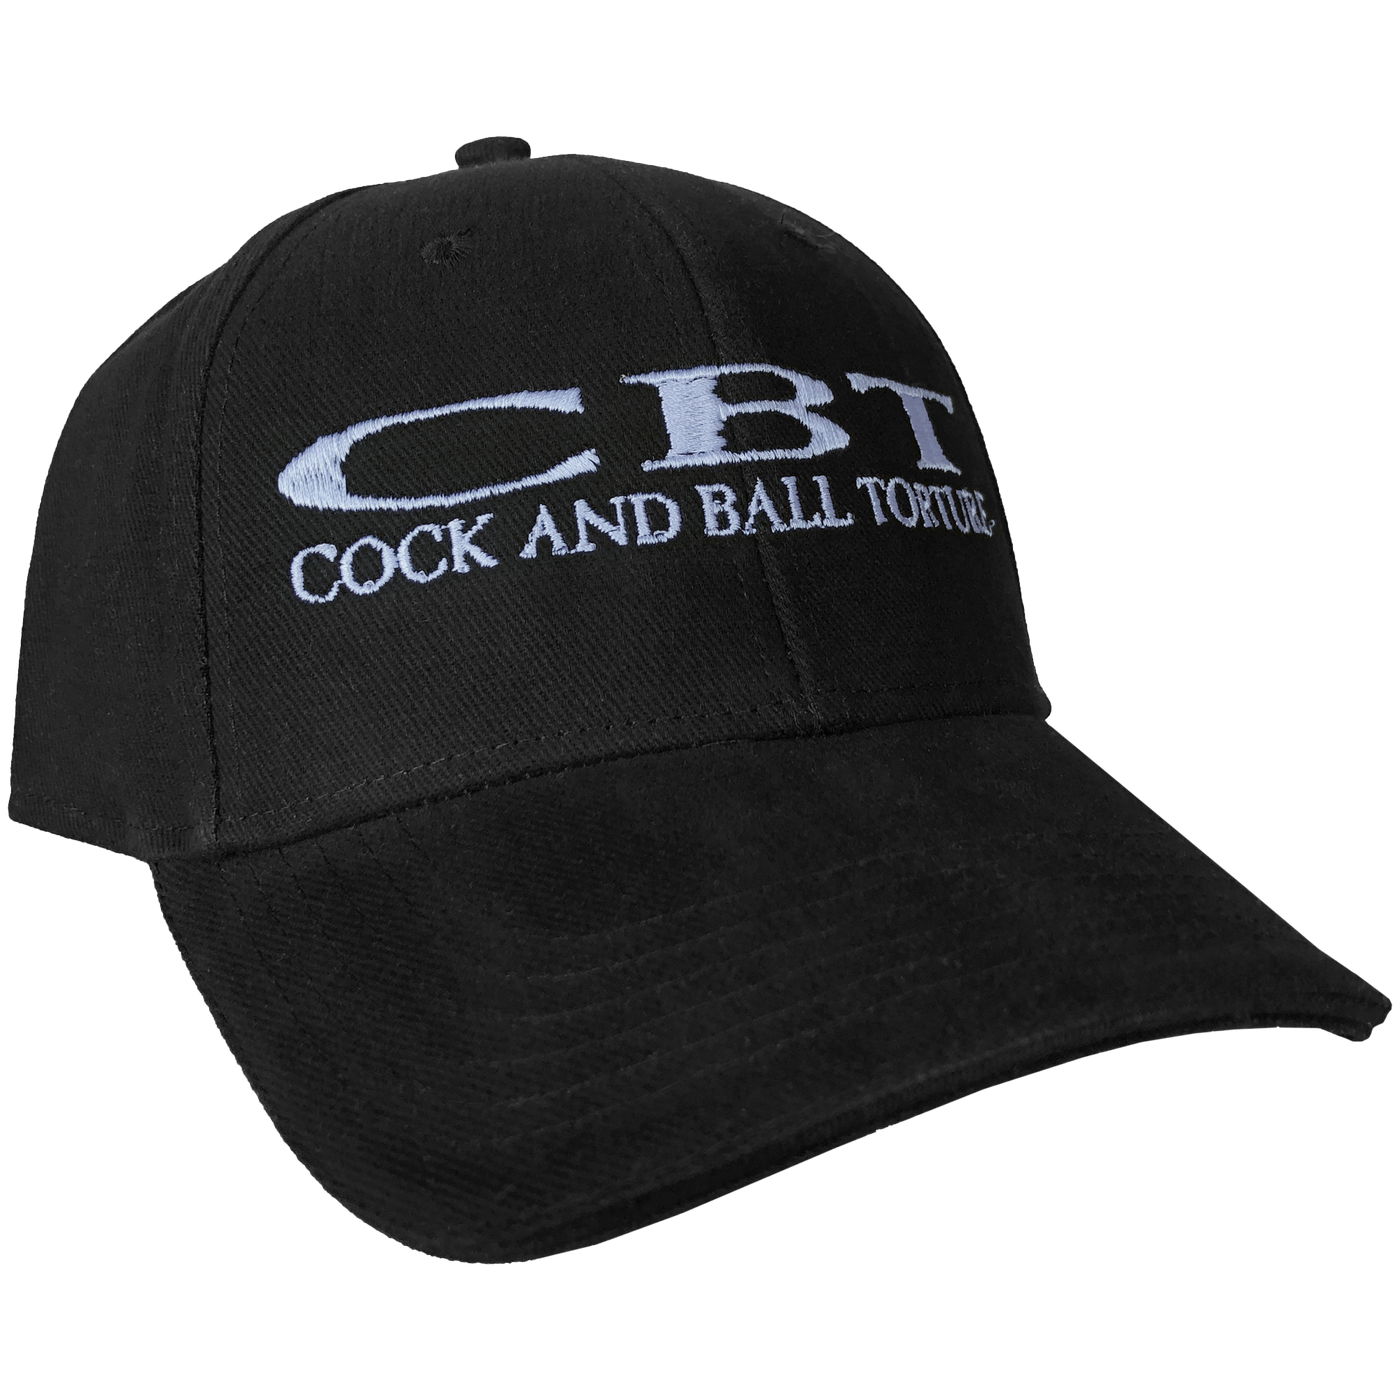 Cock And Ball Torture Baseball Hat